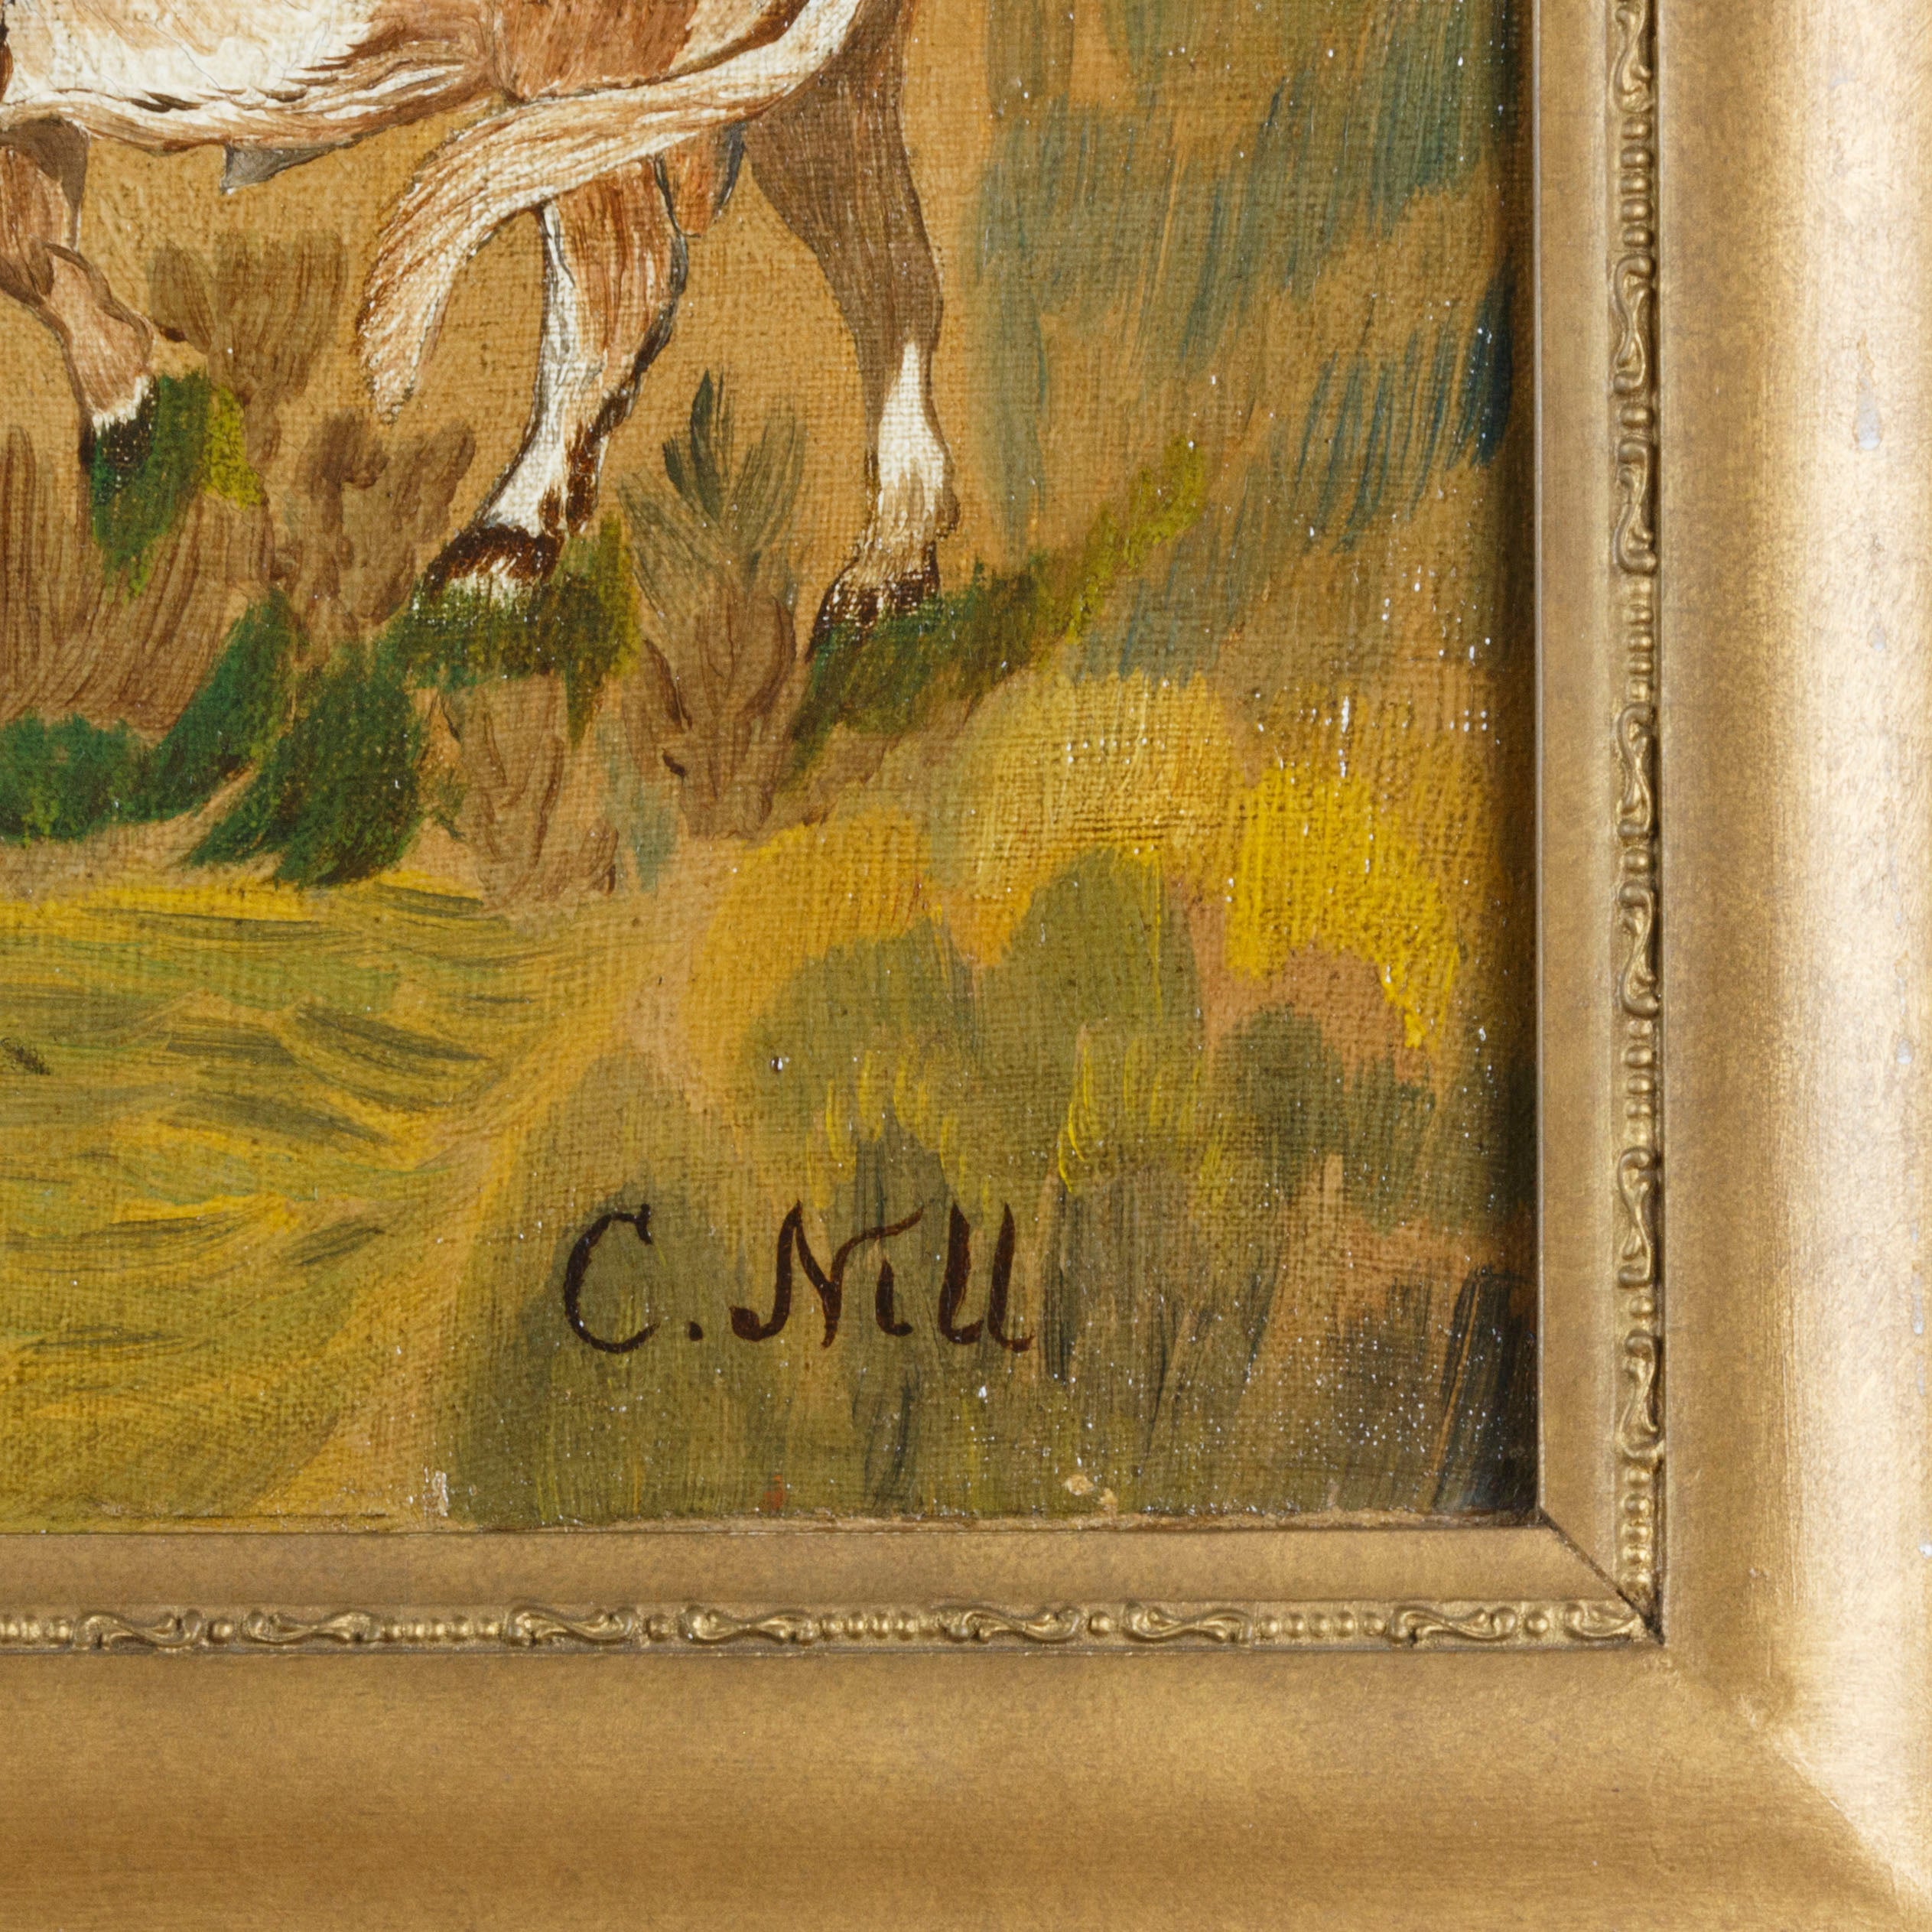 Great Cows by C. Nill